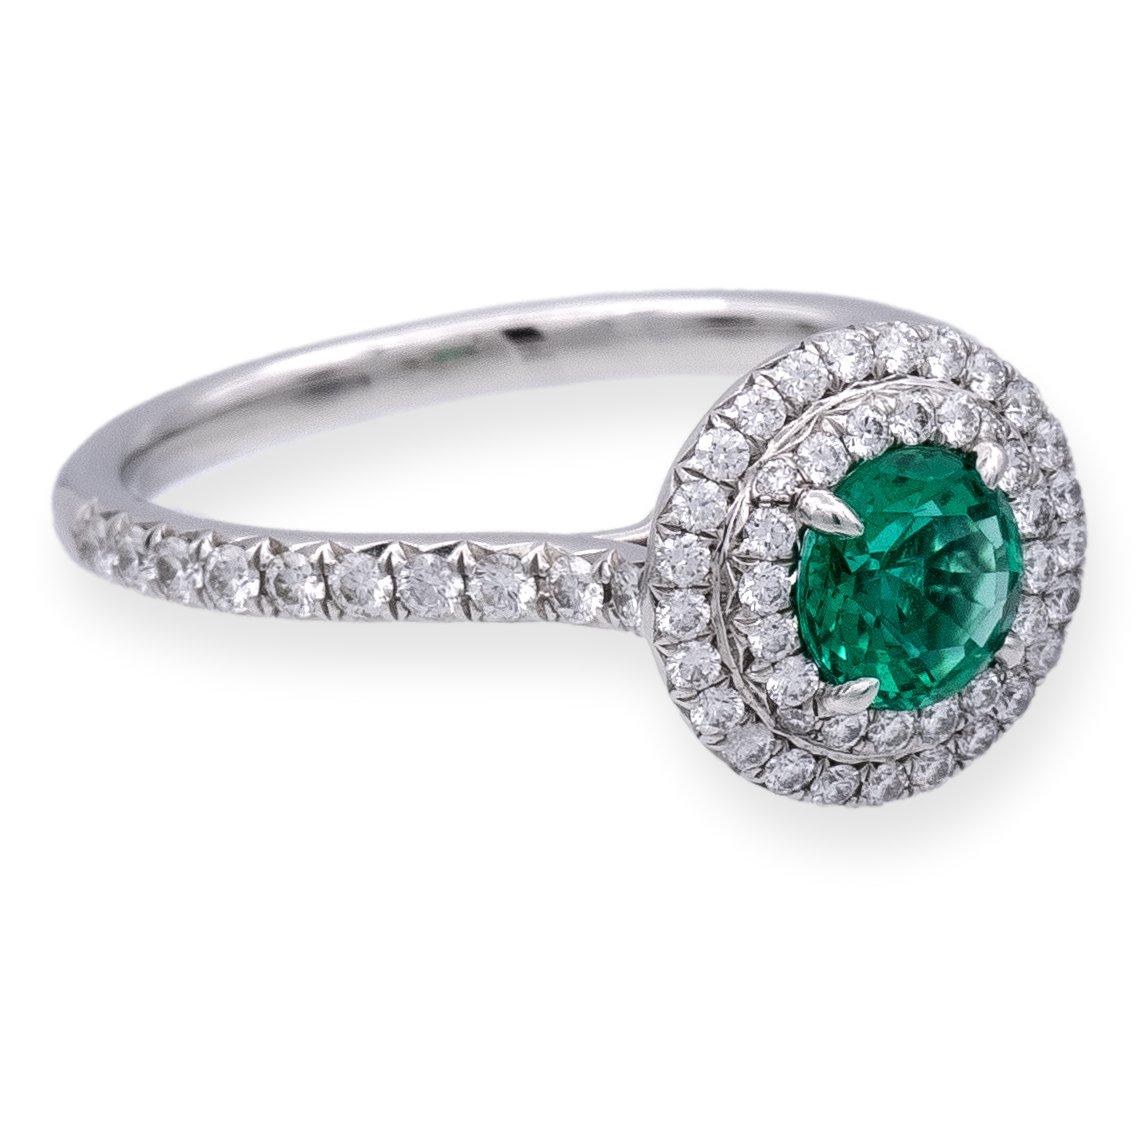 Tiffany & Co. Emerald Soleste Ring, a true gem from the revered Soleste collection. This platinum masterpiece showcases a vibrant .45 carat green emerald, elegantly encircled by a double halo of meticulously bead-set diamonds. The play of light is